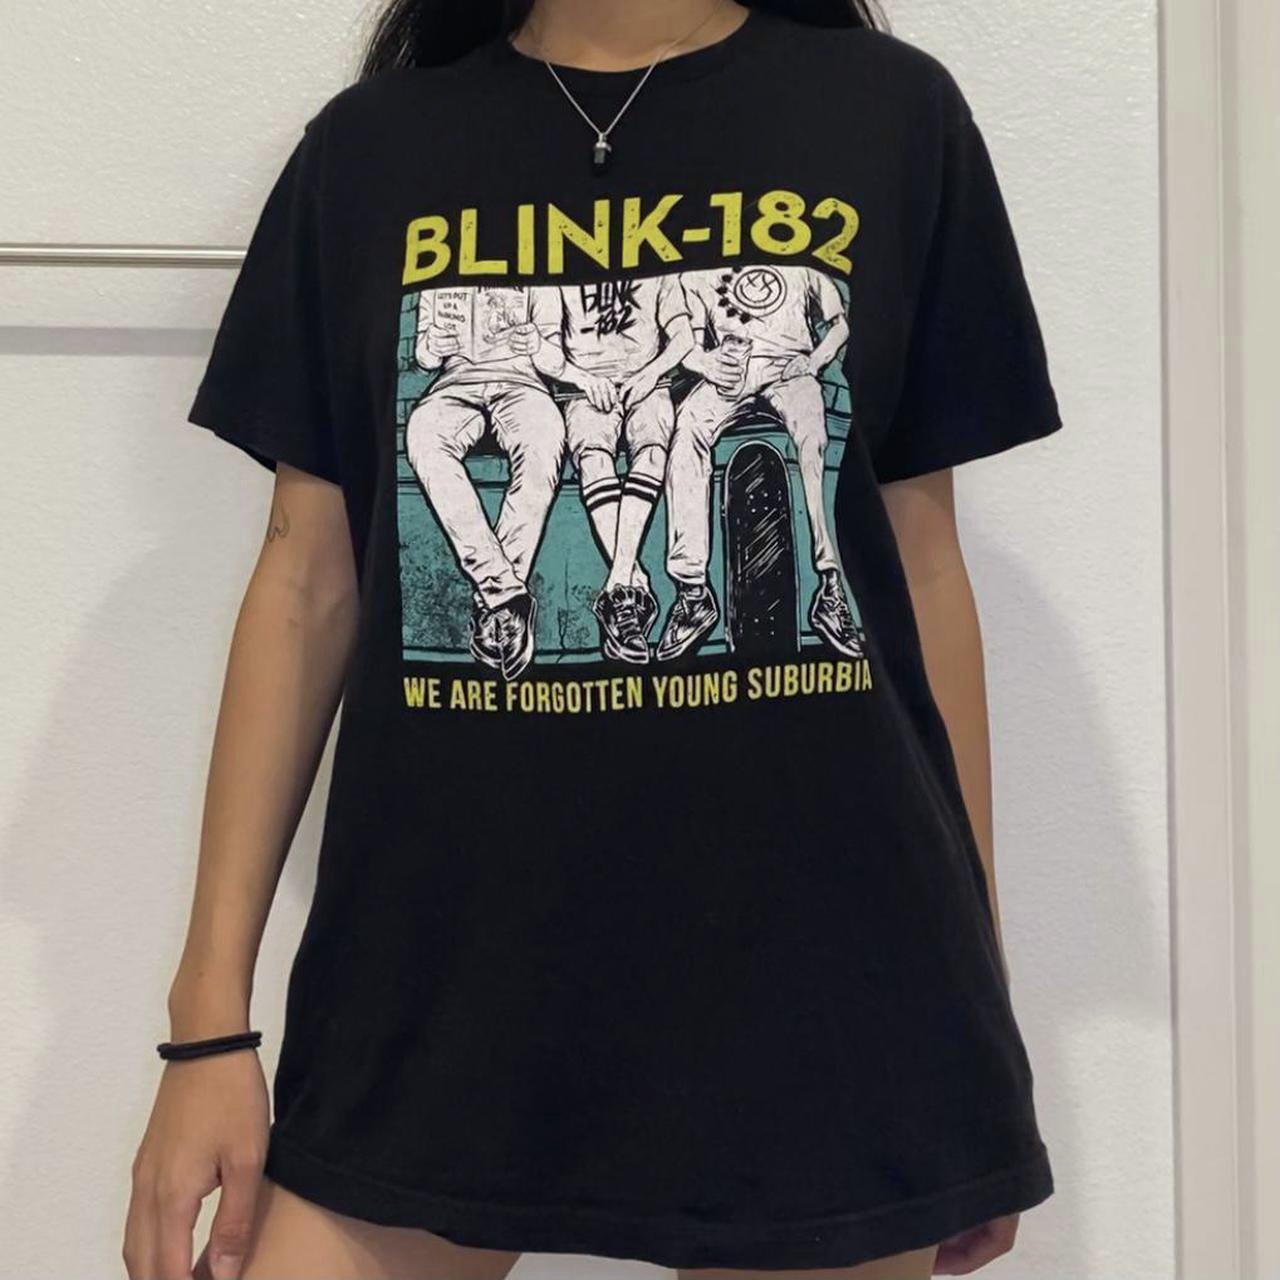 Product Image 2 - ☆ BLINK-182 BAND TEE ☆

♡